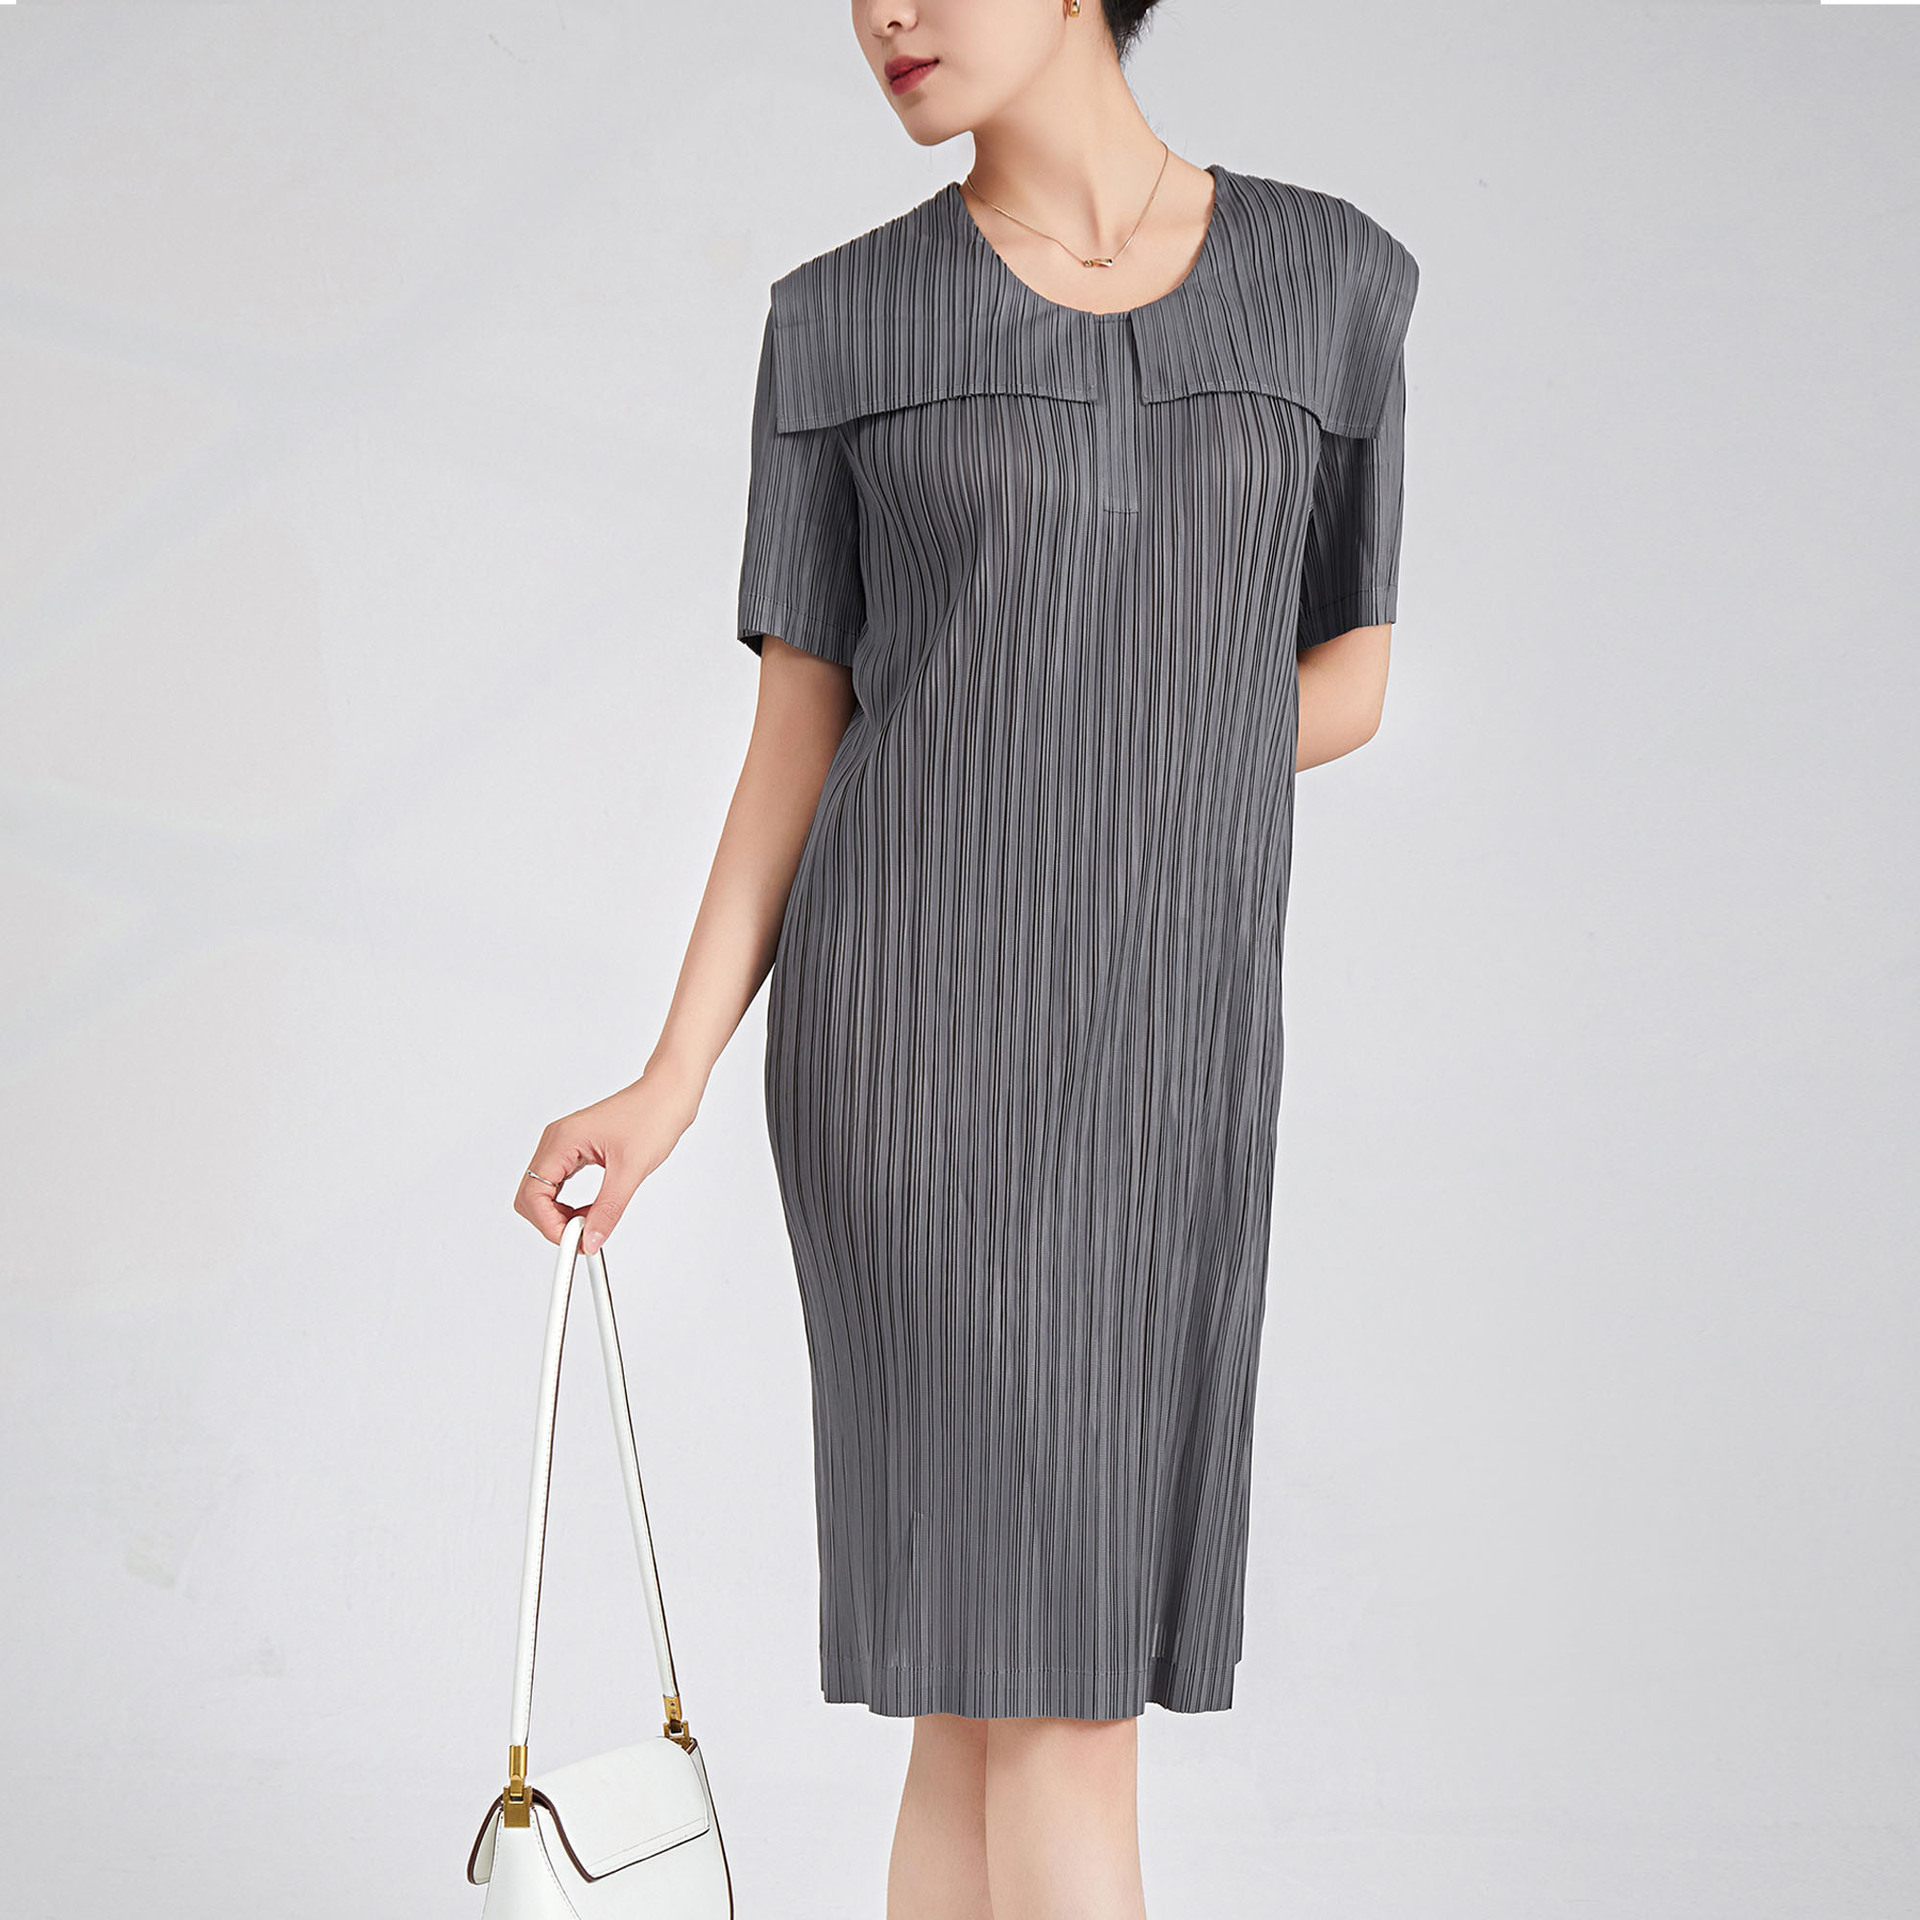 Figure-Flattering Styles for Confidence lady's fashion Fashion Dresses Trendy styles for the fashion-forward woman